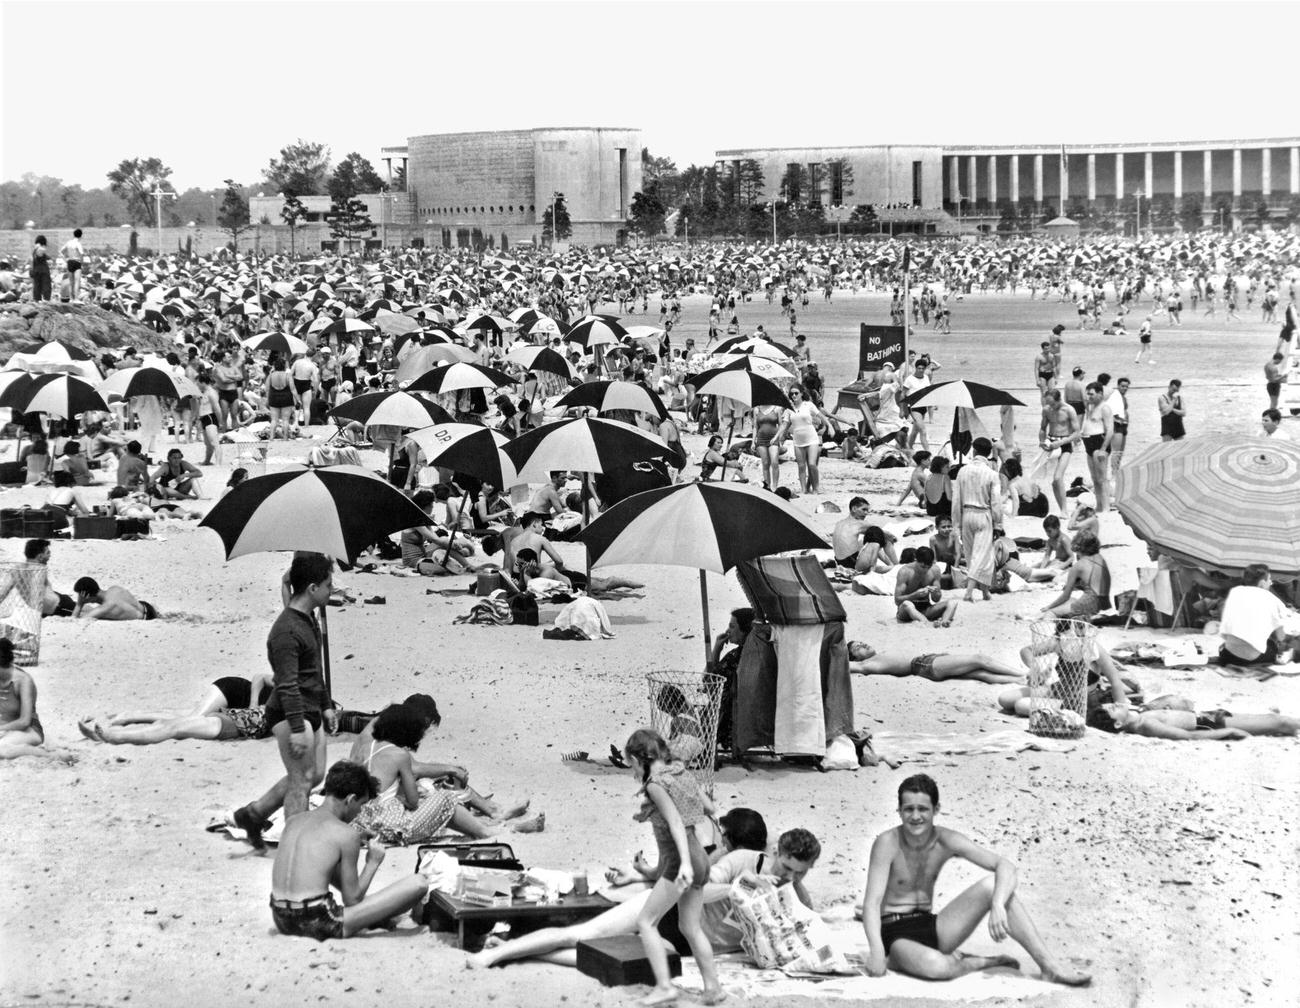 A Warm Day In July At Orchard Beach Near City Island In The Bronx, 1938